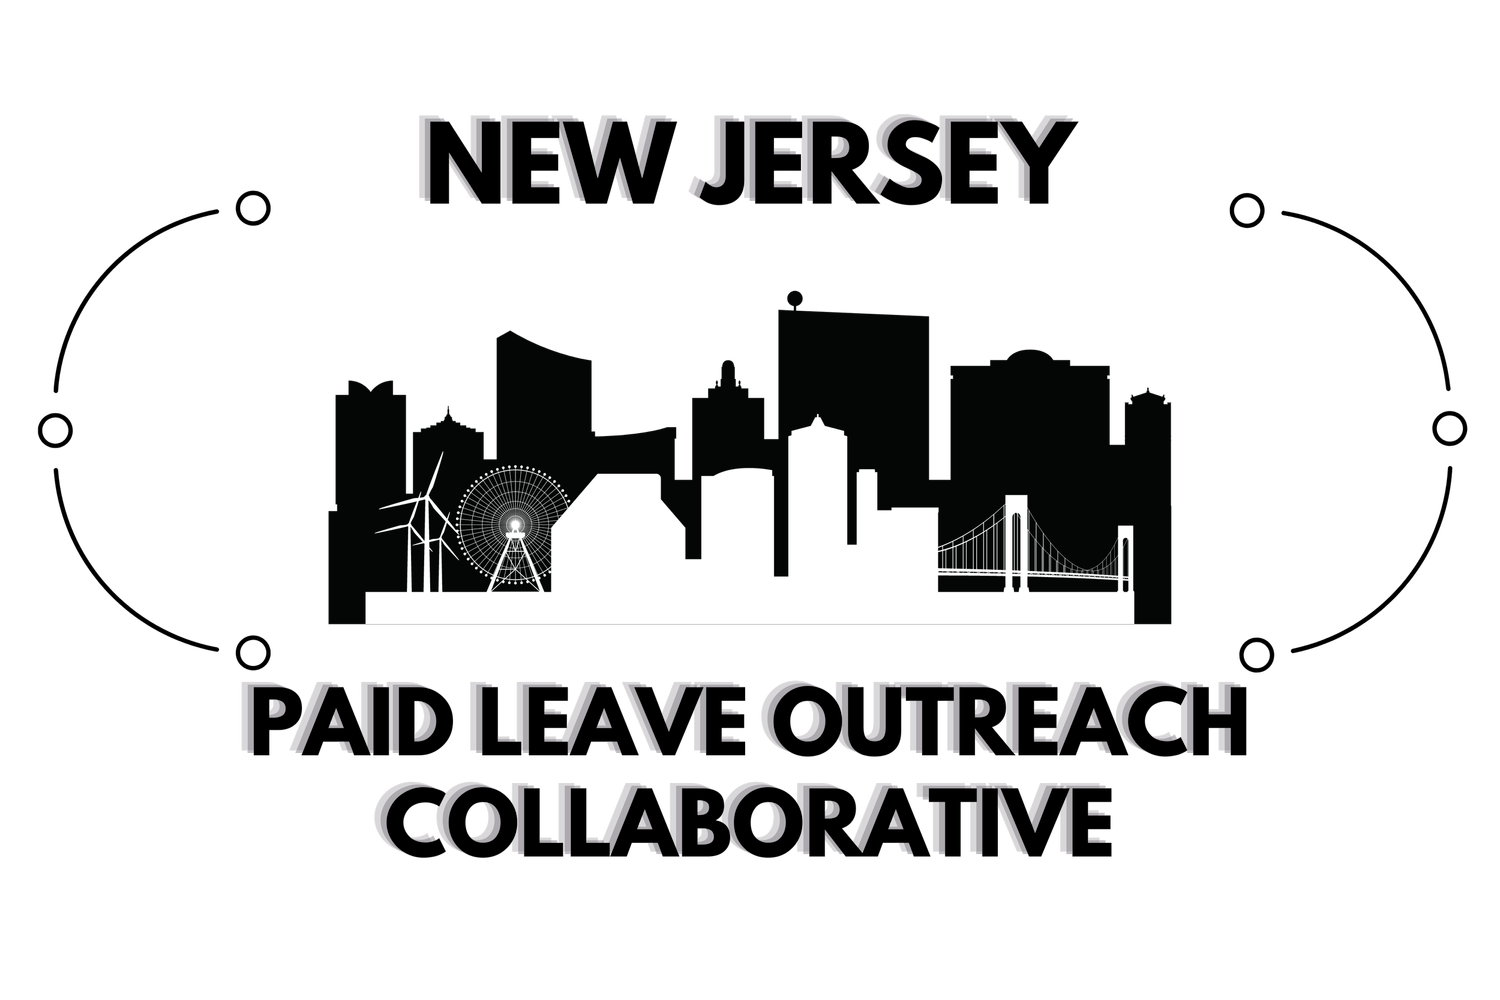 New Jersey Paid Leave Outreach Collaborative